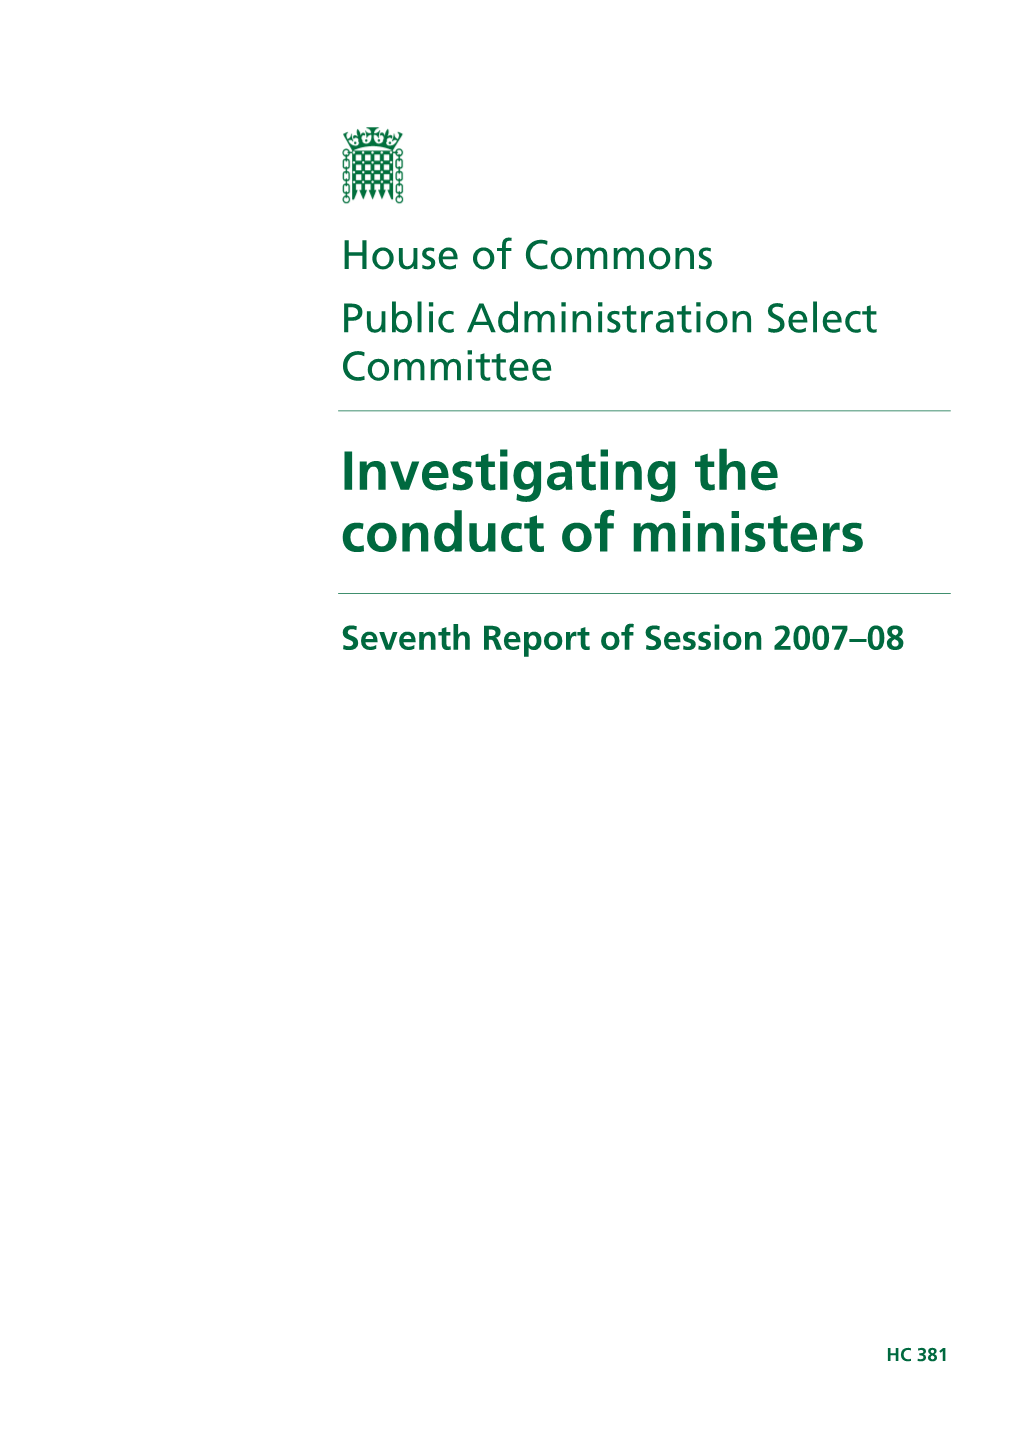 Investigating the Conduct of Ministers